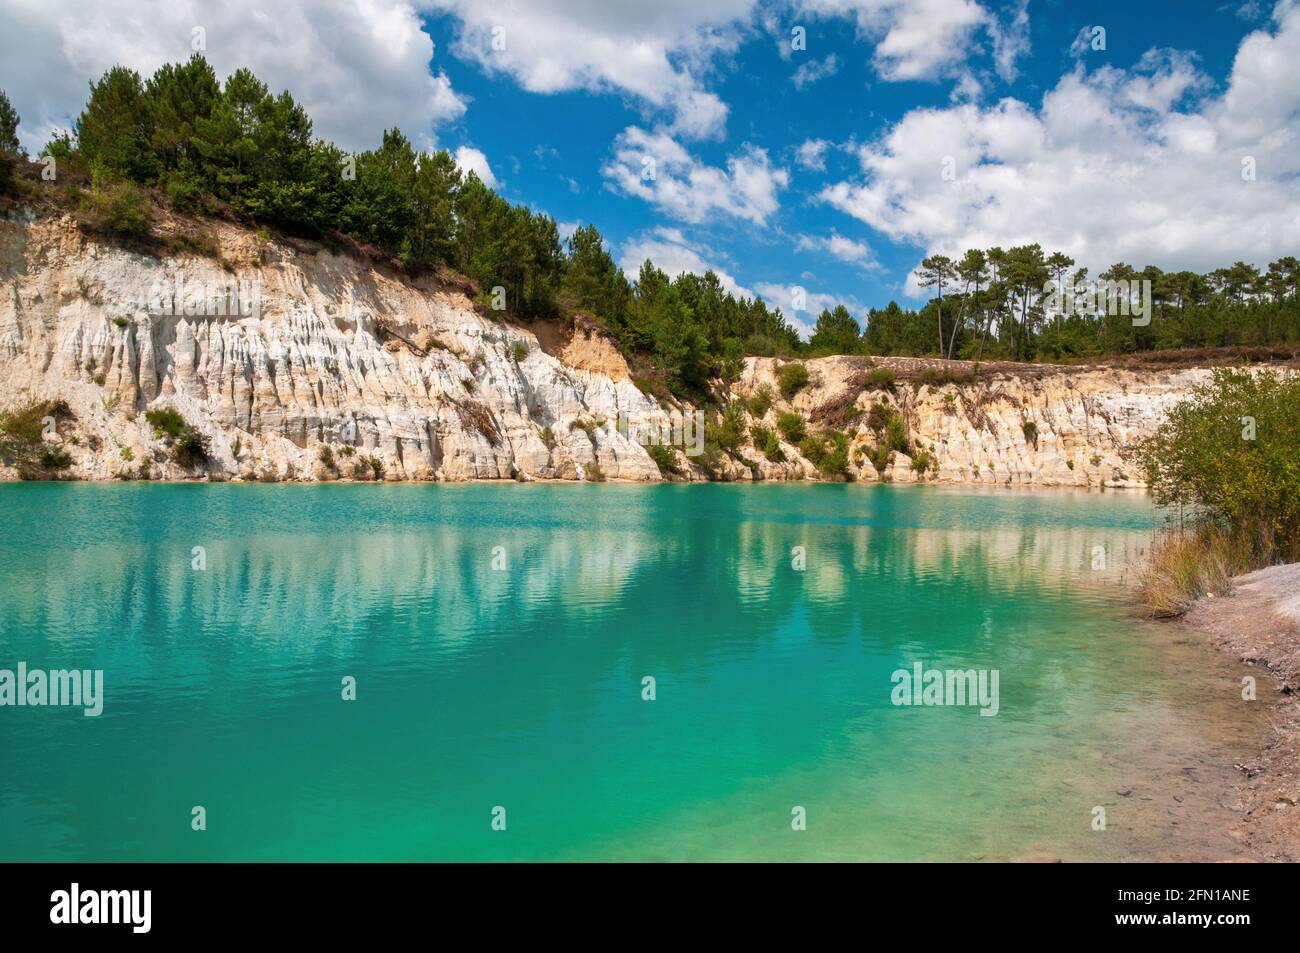 Guizengeard kaolinite quarries with artificial turquoise green lakes set in a pine and oak forest, Charente (16), Nouvelle-Aquitaine region, France Stock Photo